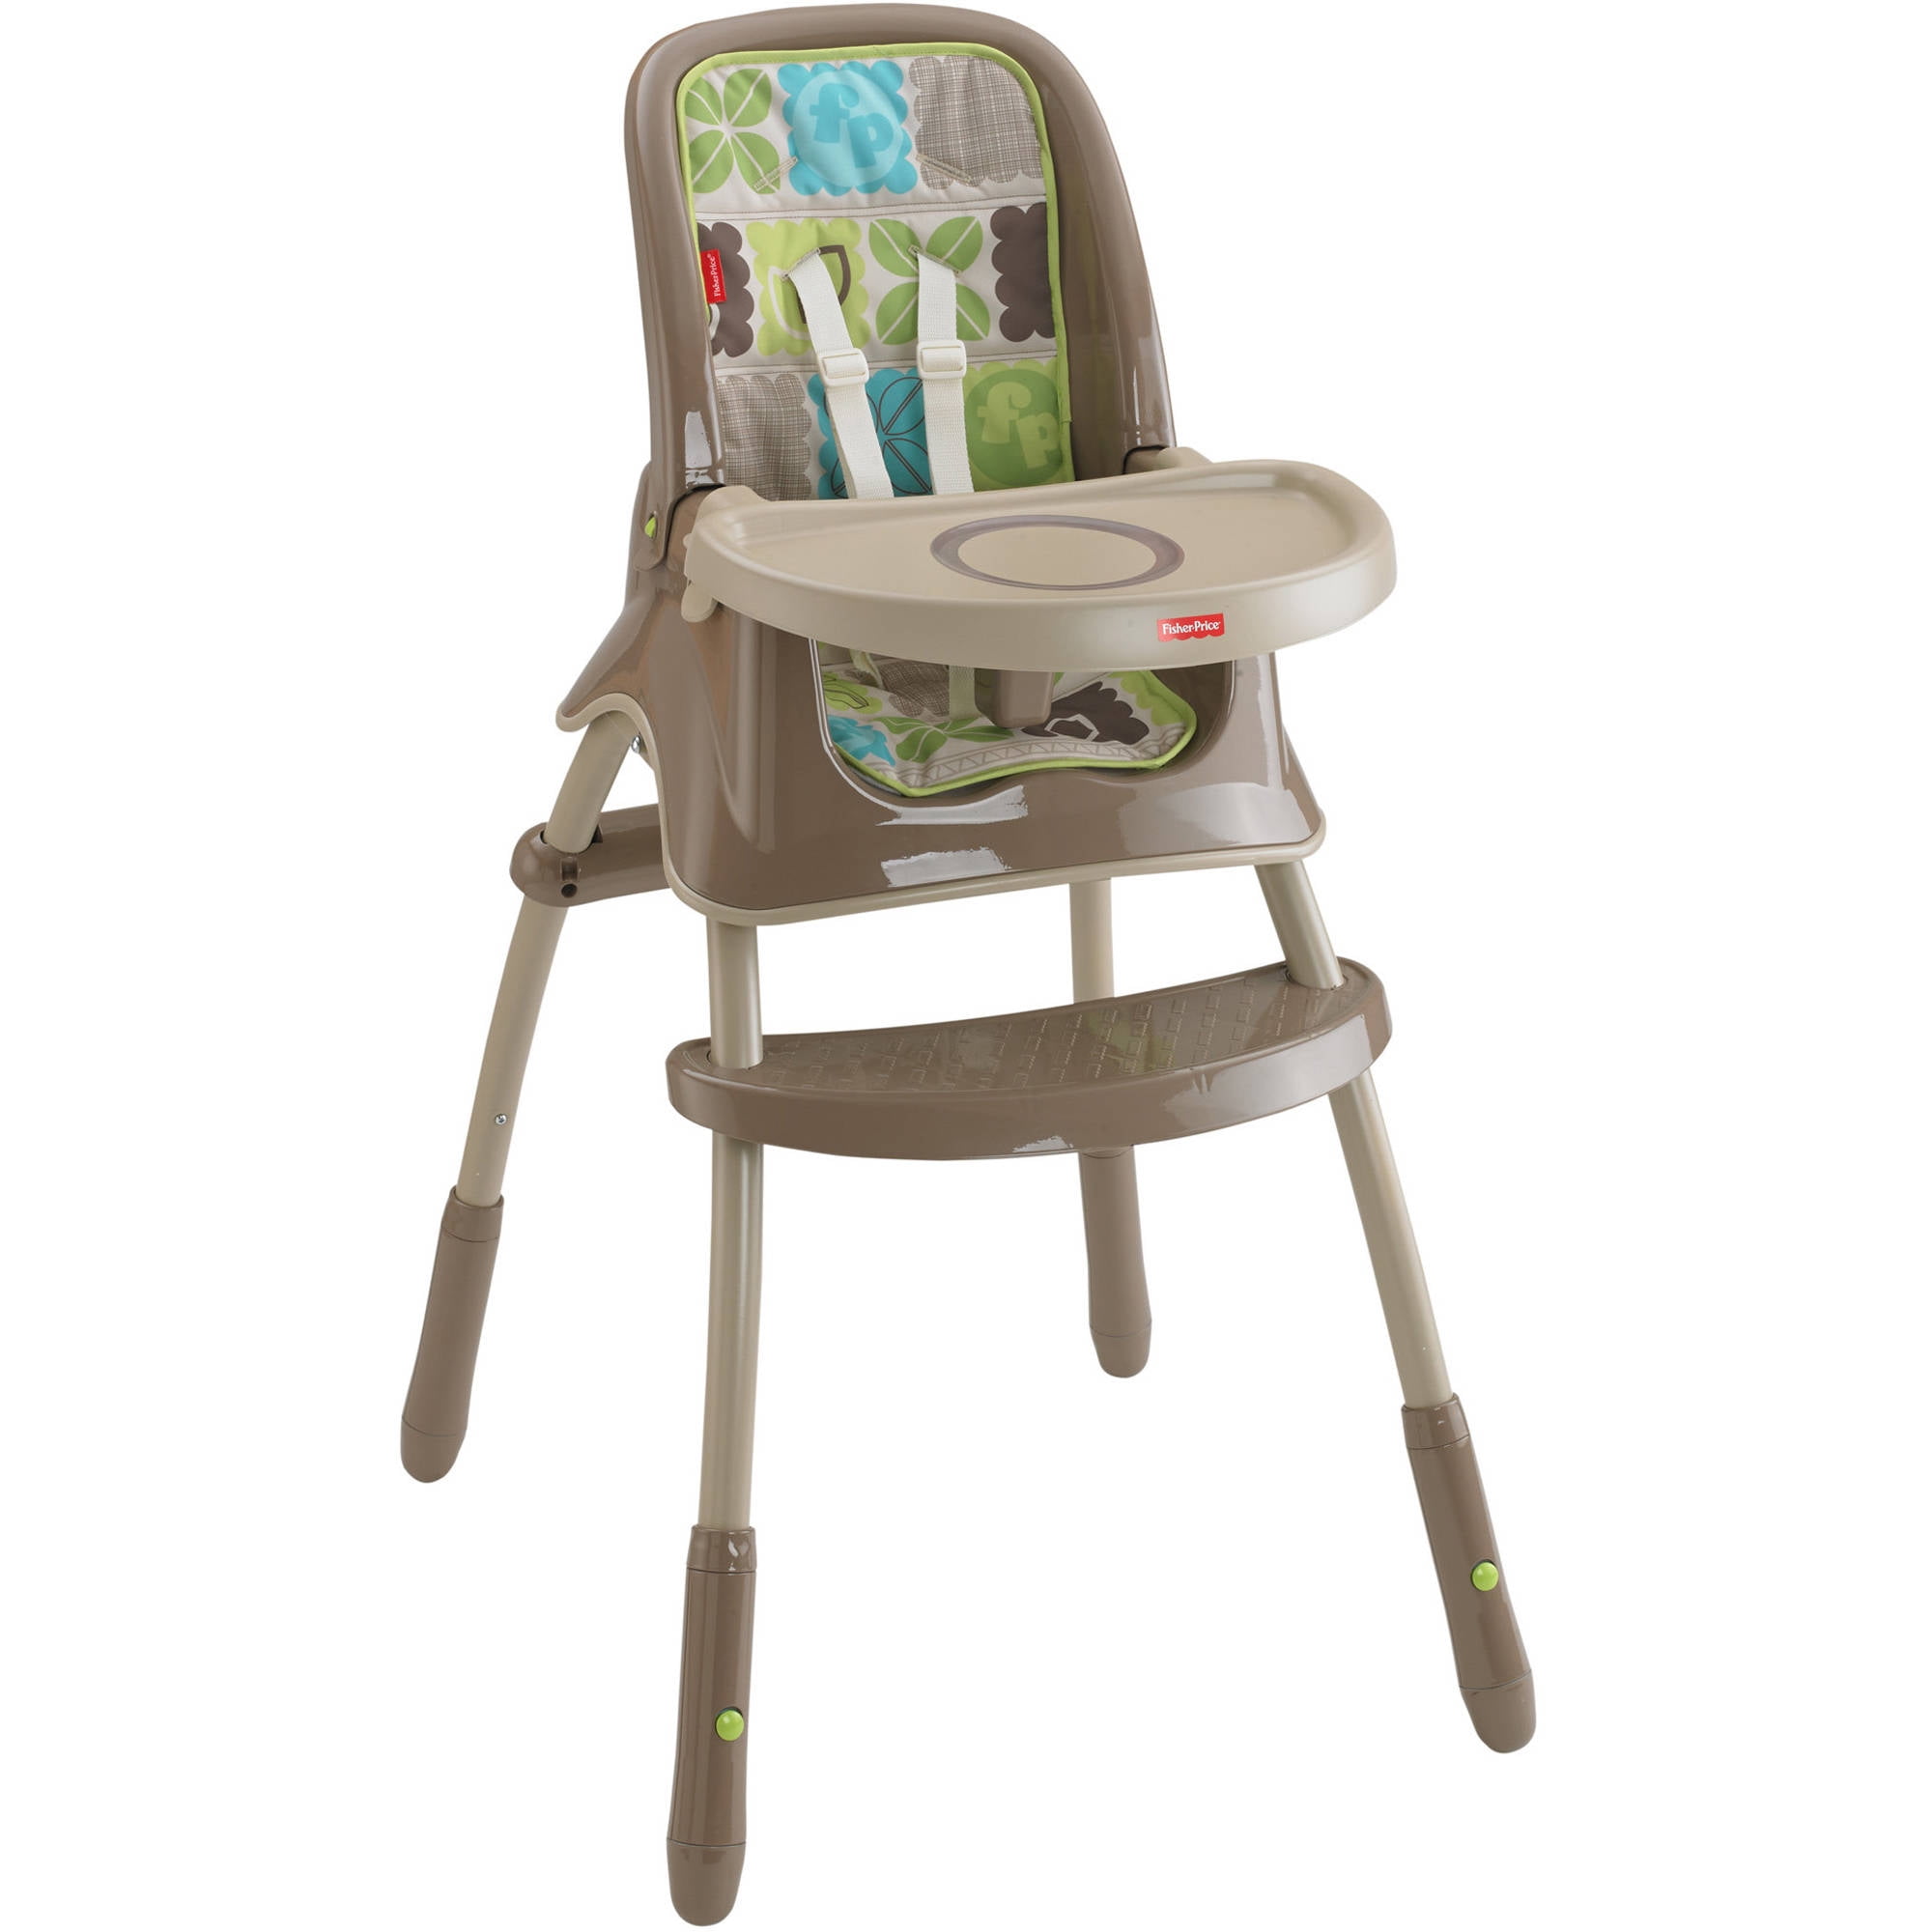 Bunny Fisher-Price Grow with Me High Chair 